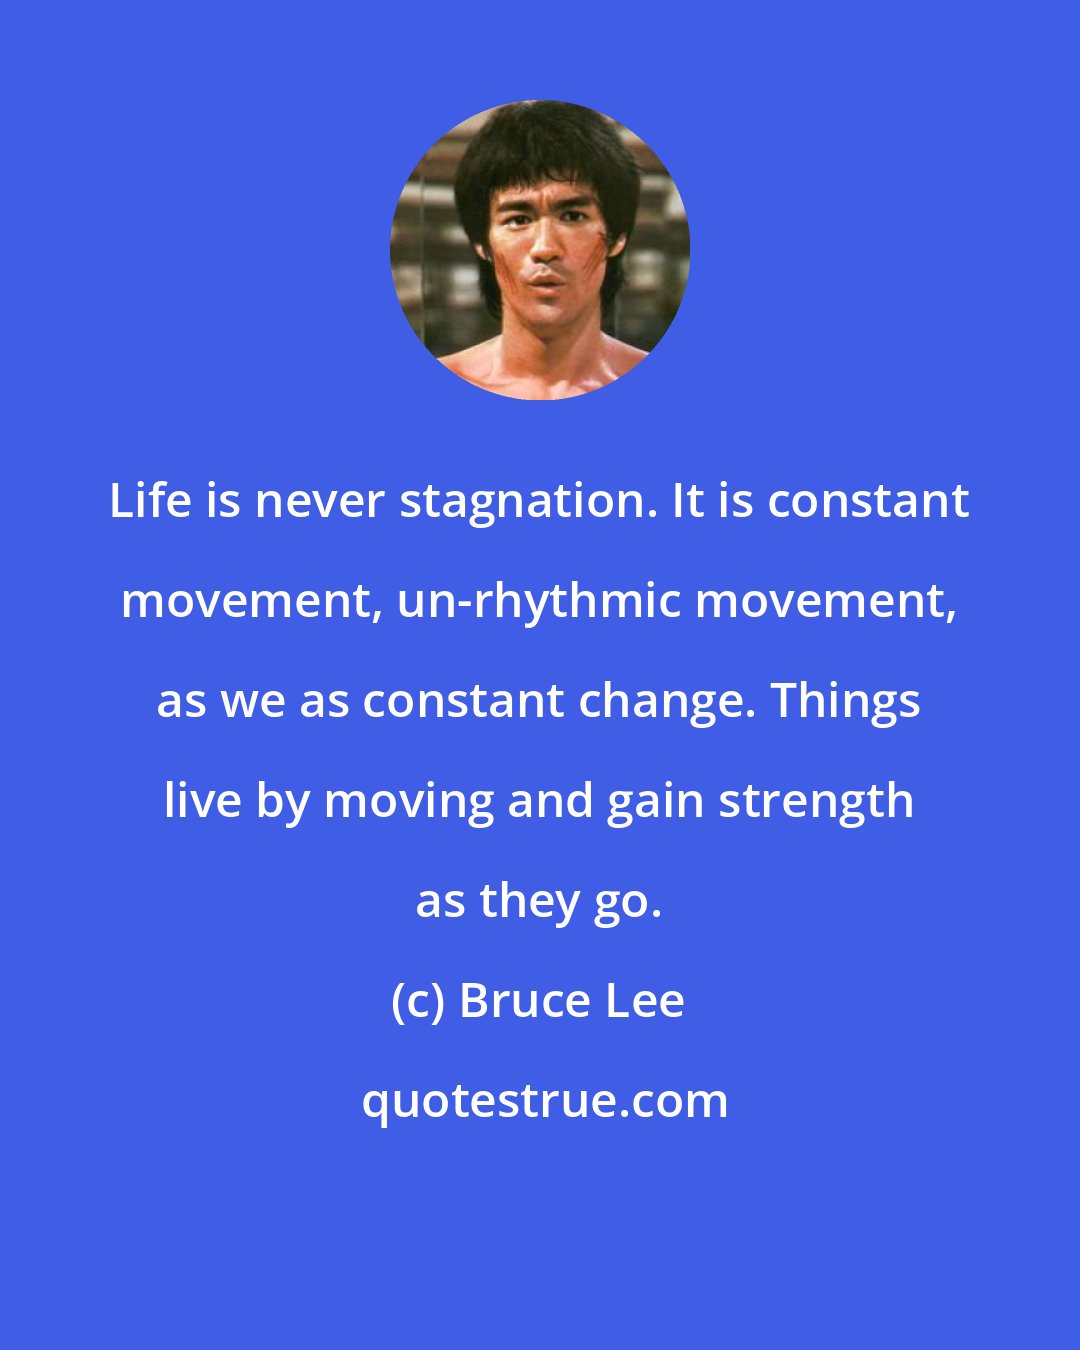 Bruce Lee: Life is never stagnation. It is constant movement, un-rhythmic movement, as we as constant change. Things live by moving and gain strength as they go.